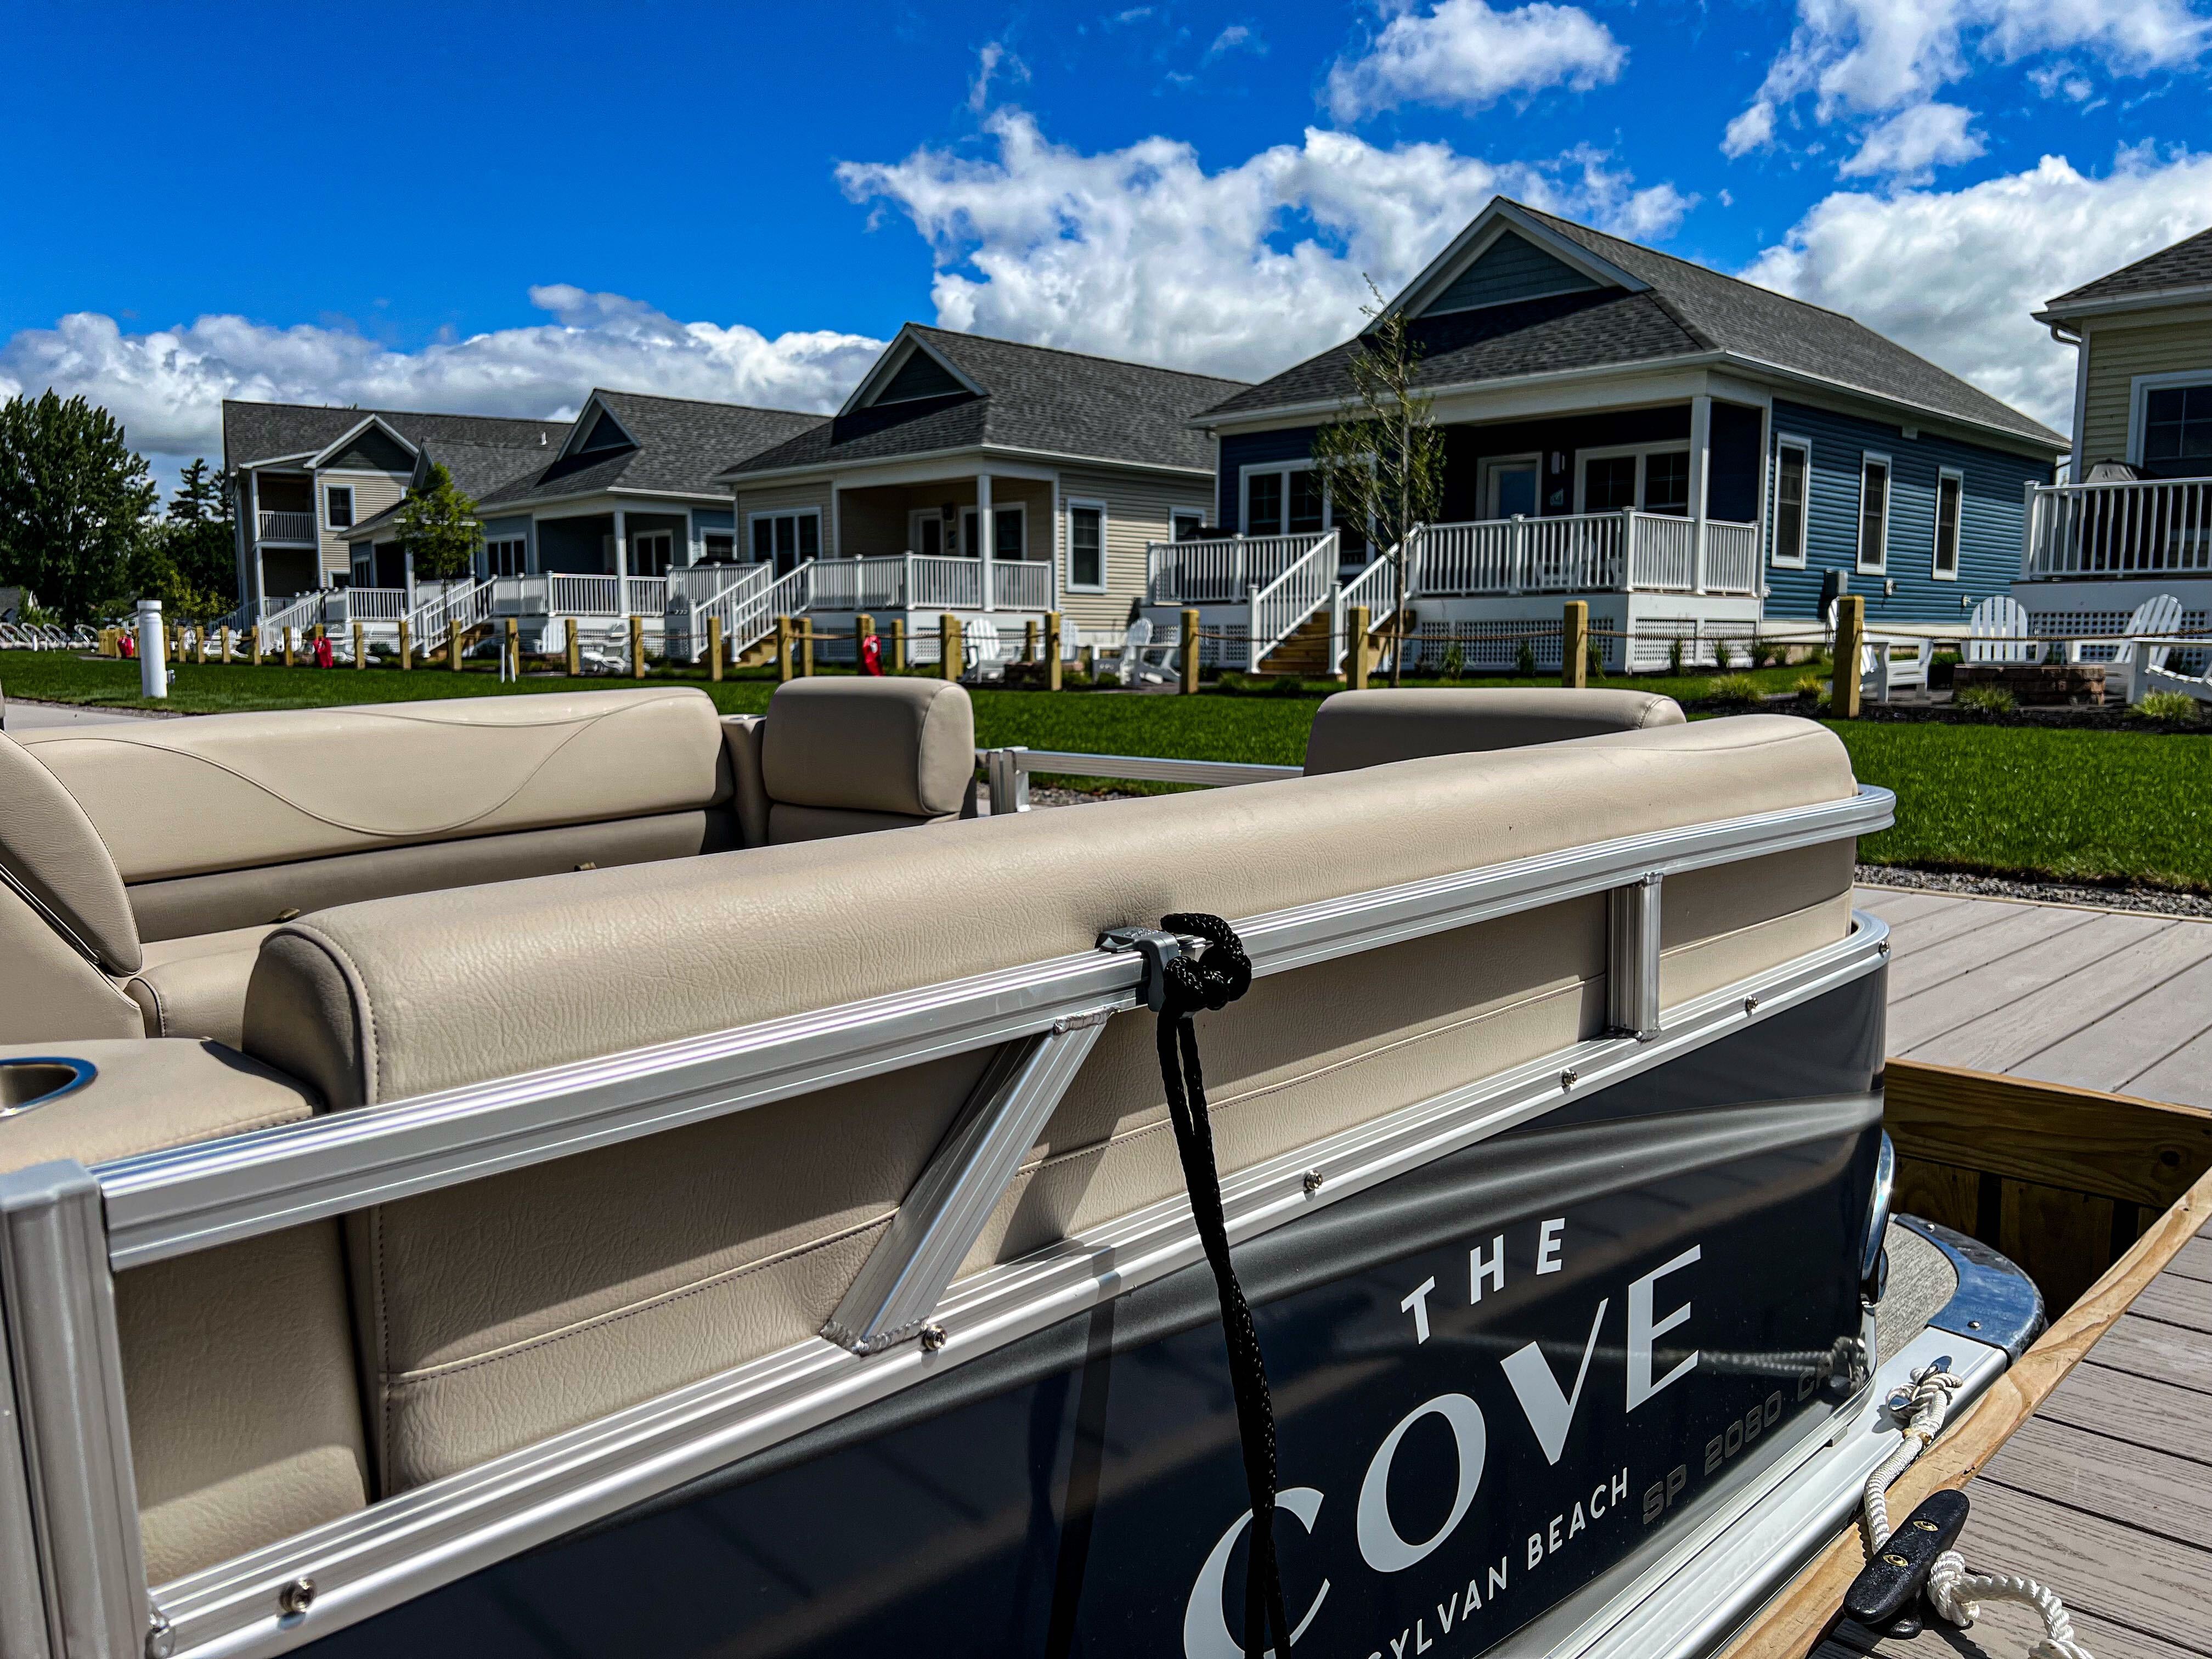 The Cove Featured Online with Big Frog 104: "Peek Inside The Cove, $35 Million Resort on Oneida Lake That Comes with Your Own Pontoon"